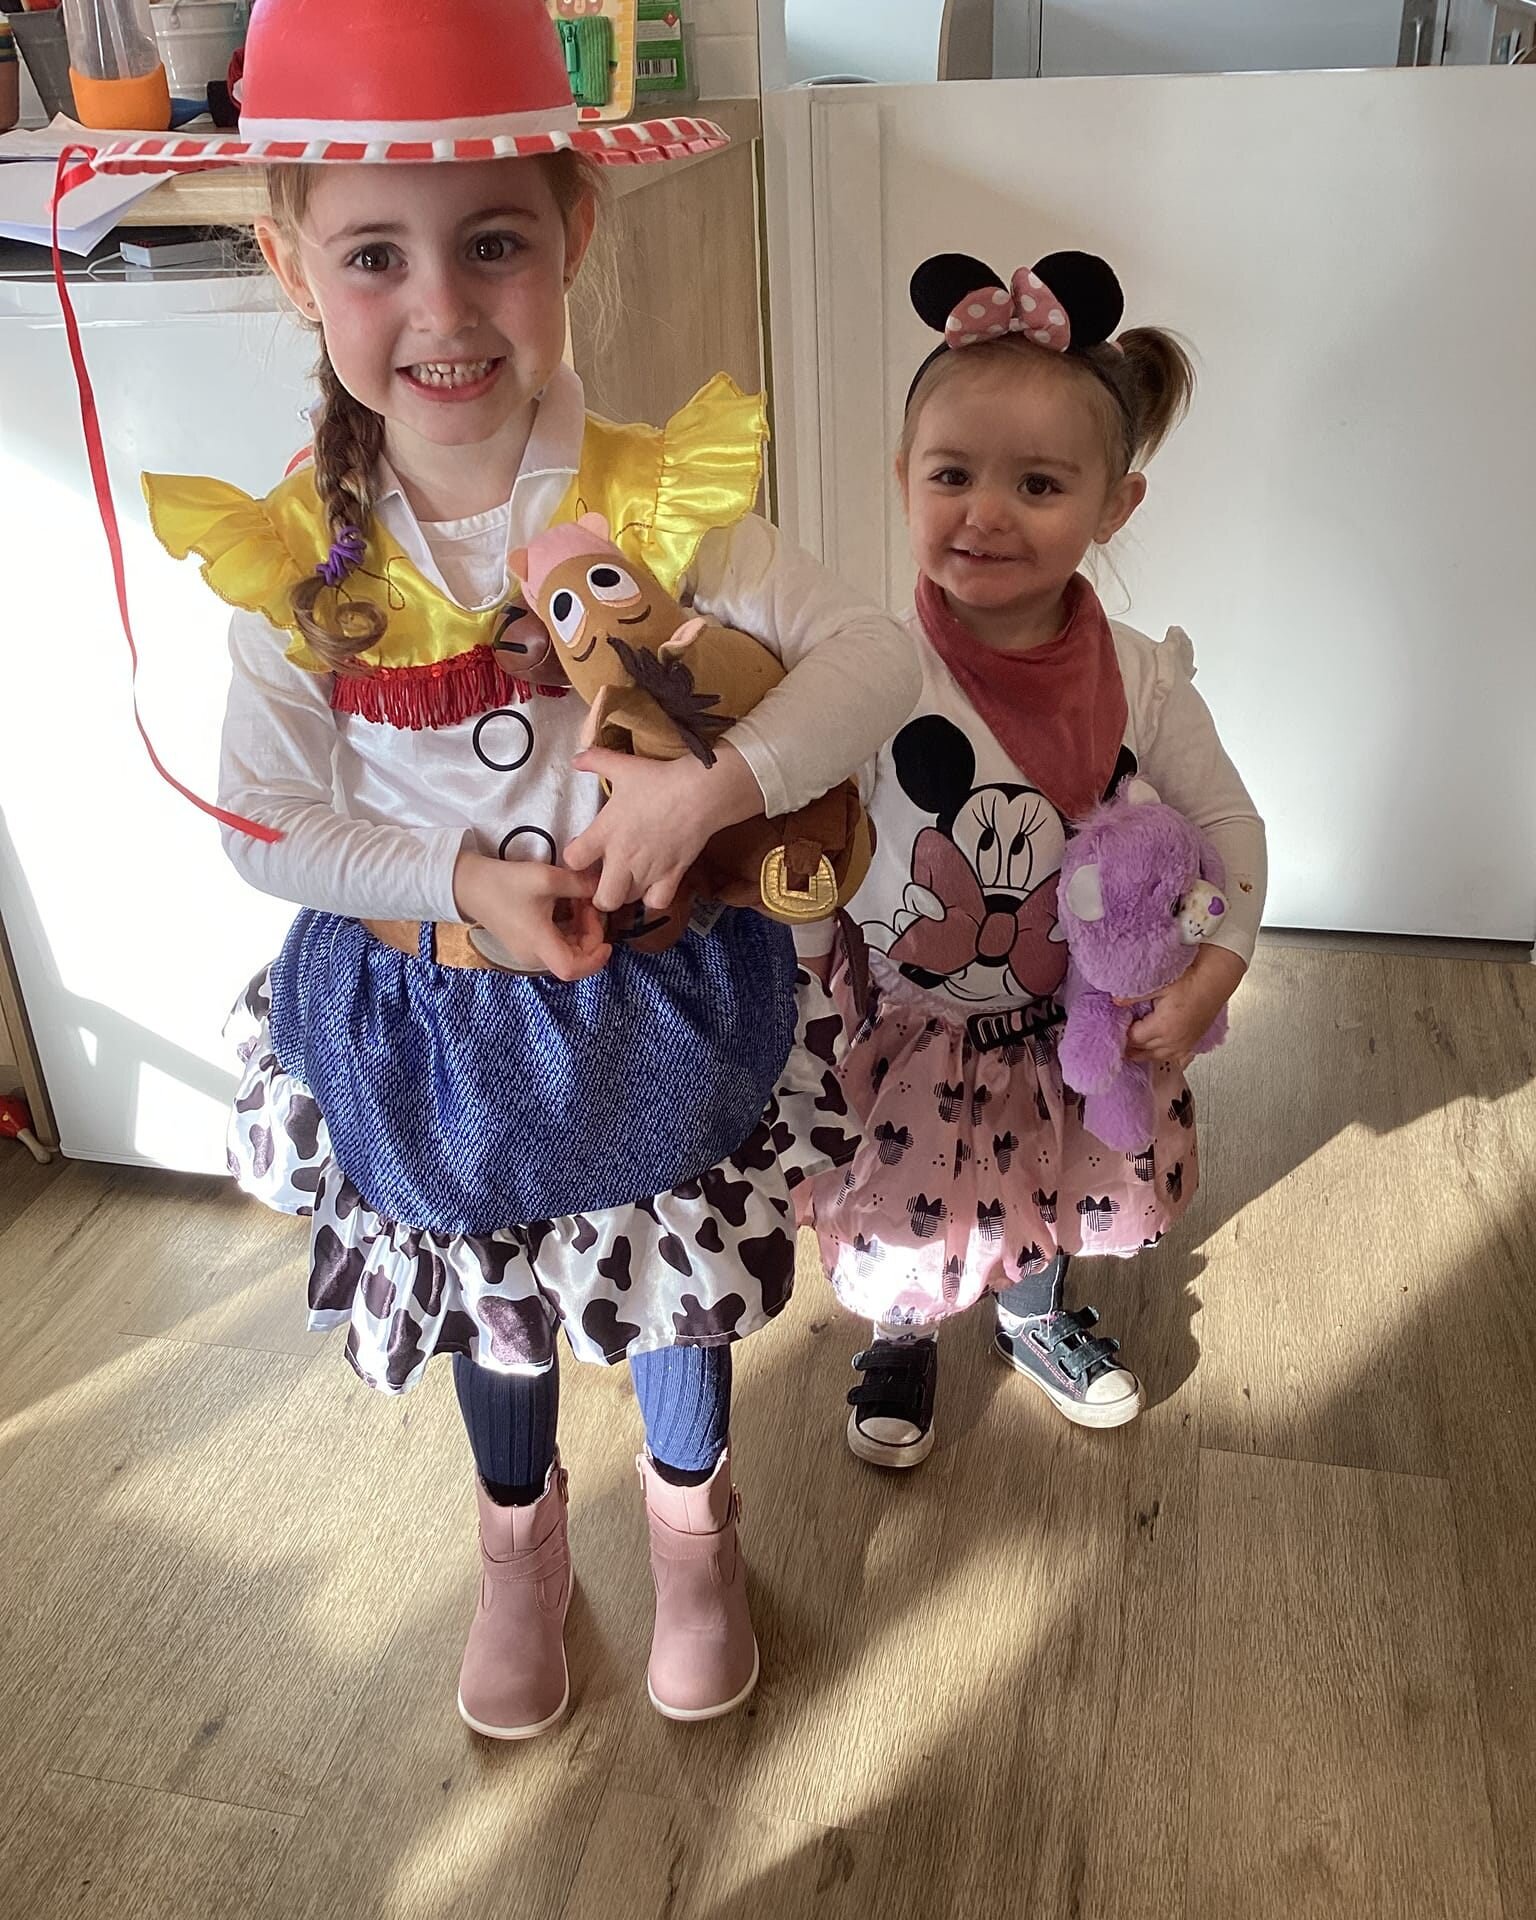 Book Week is drawing to an end and we've had some creative parents! It's so fun and exciting seeing all the creative outfits! 🙌

The children have had an absolute ball showing off all their outfits! 😍